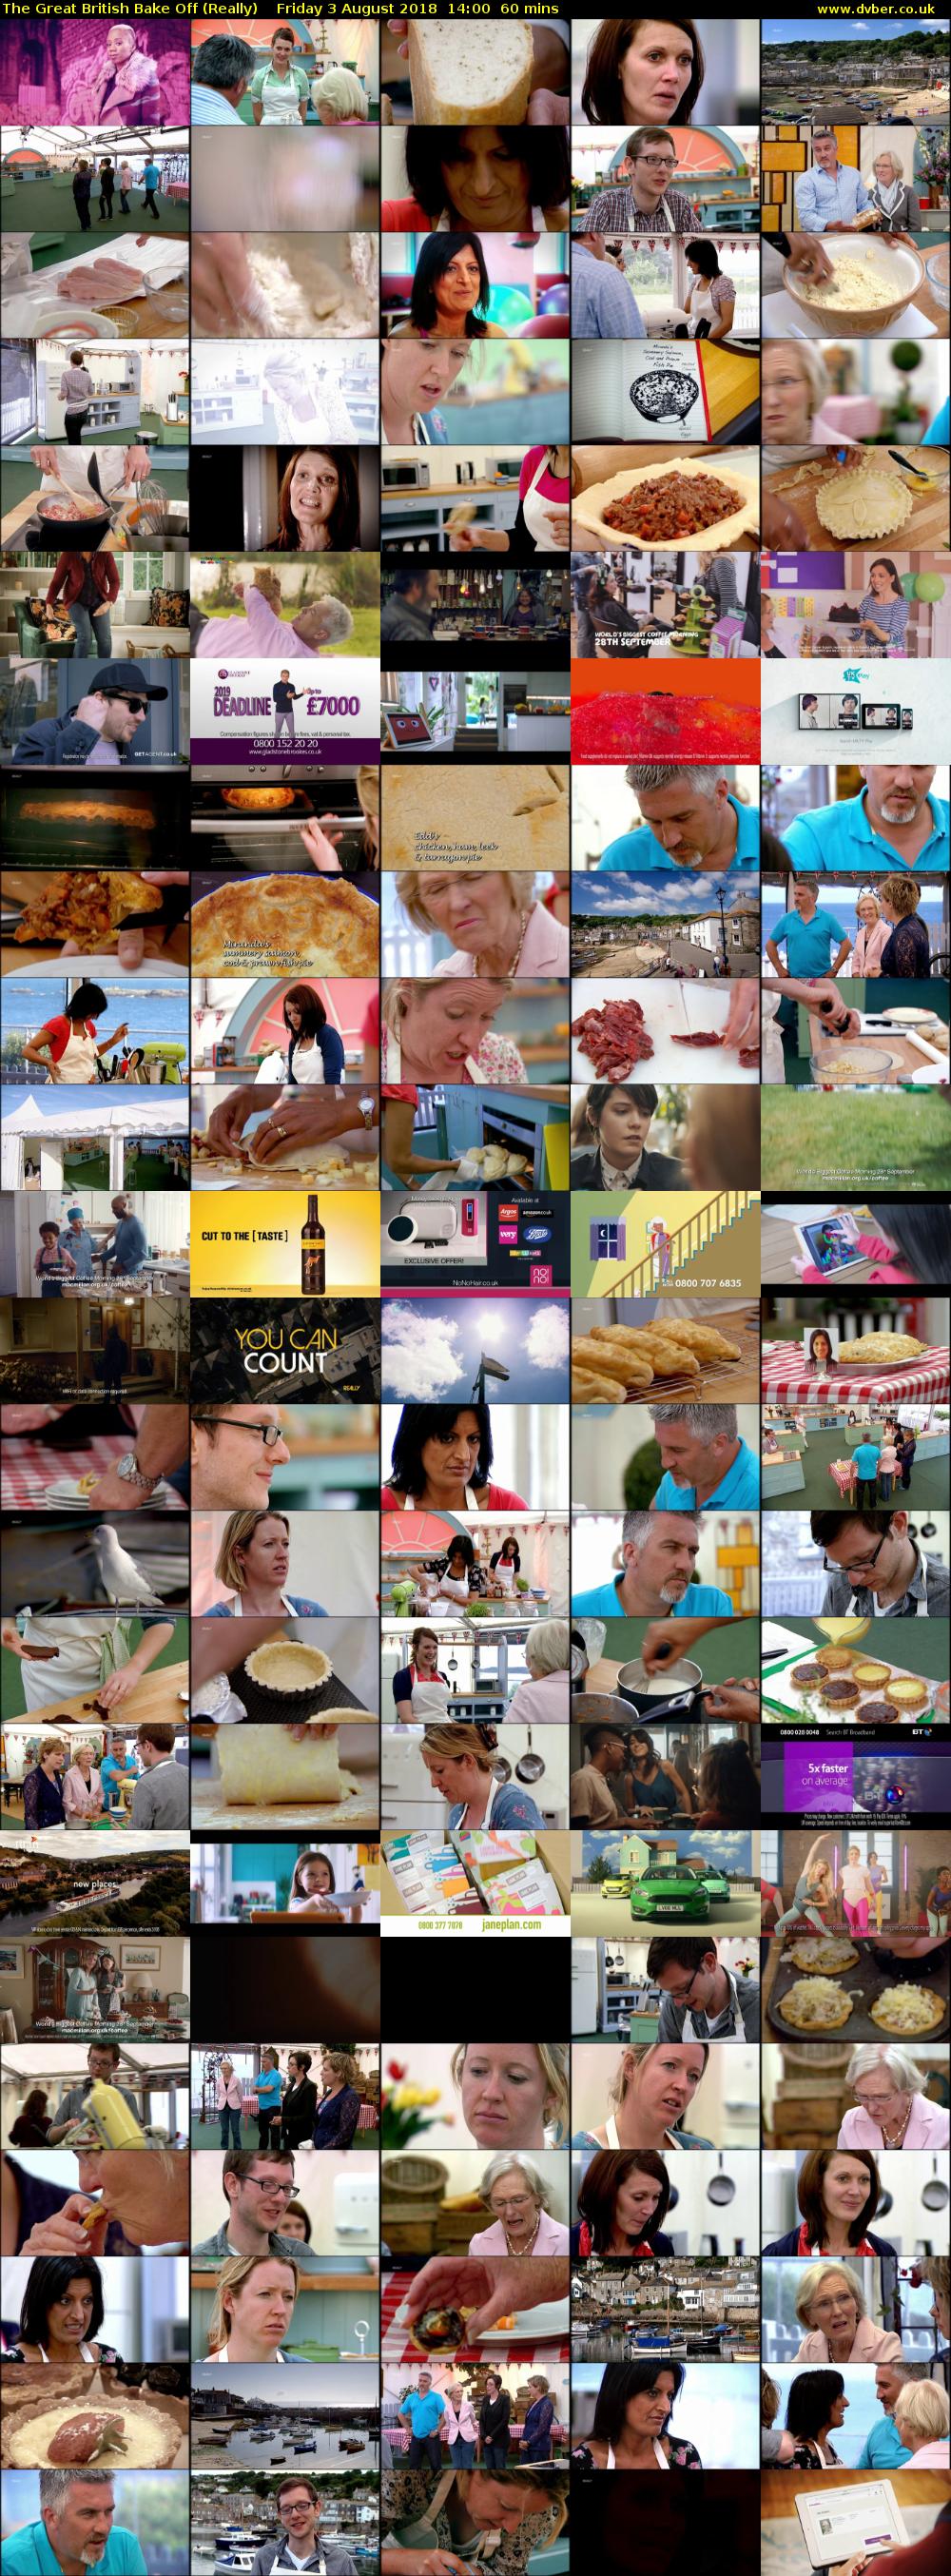 The Great British Bake Off (Really) Friday 3 August 2018 14:00 - 15:00